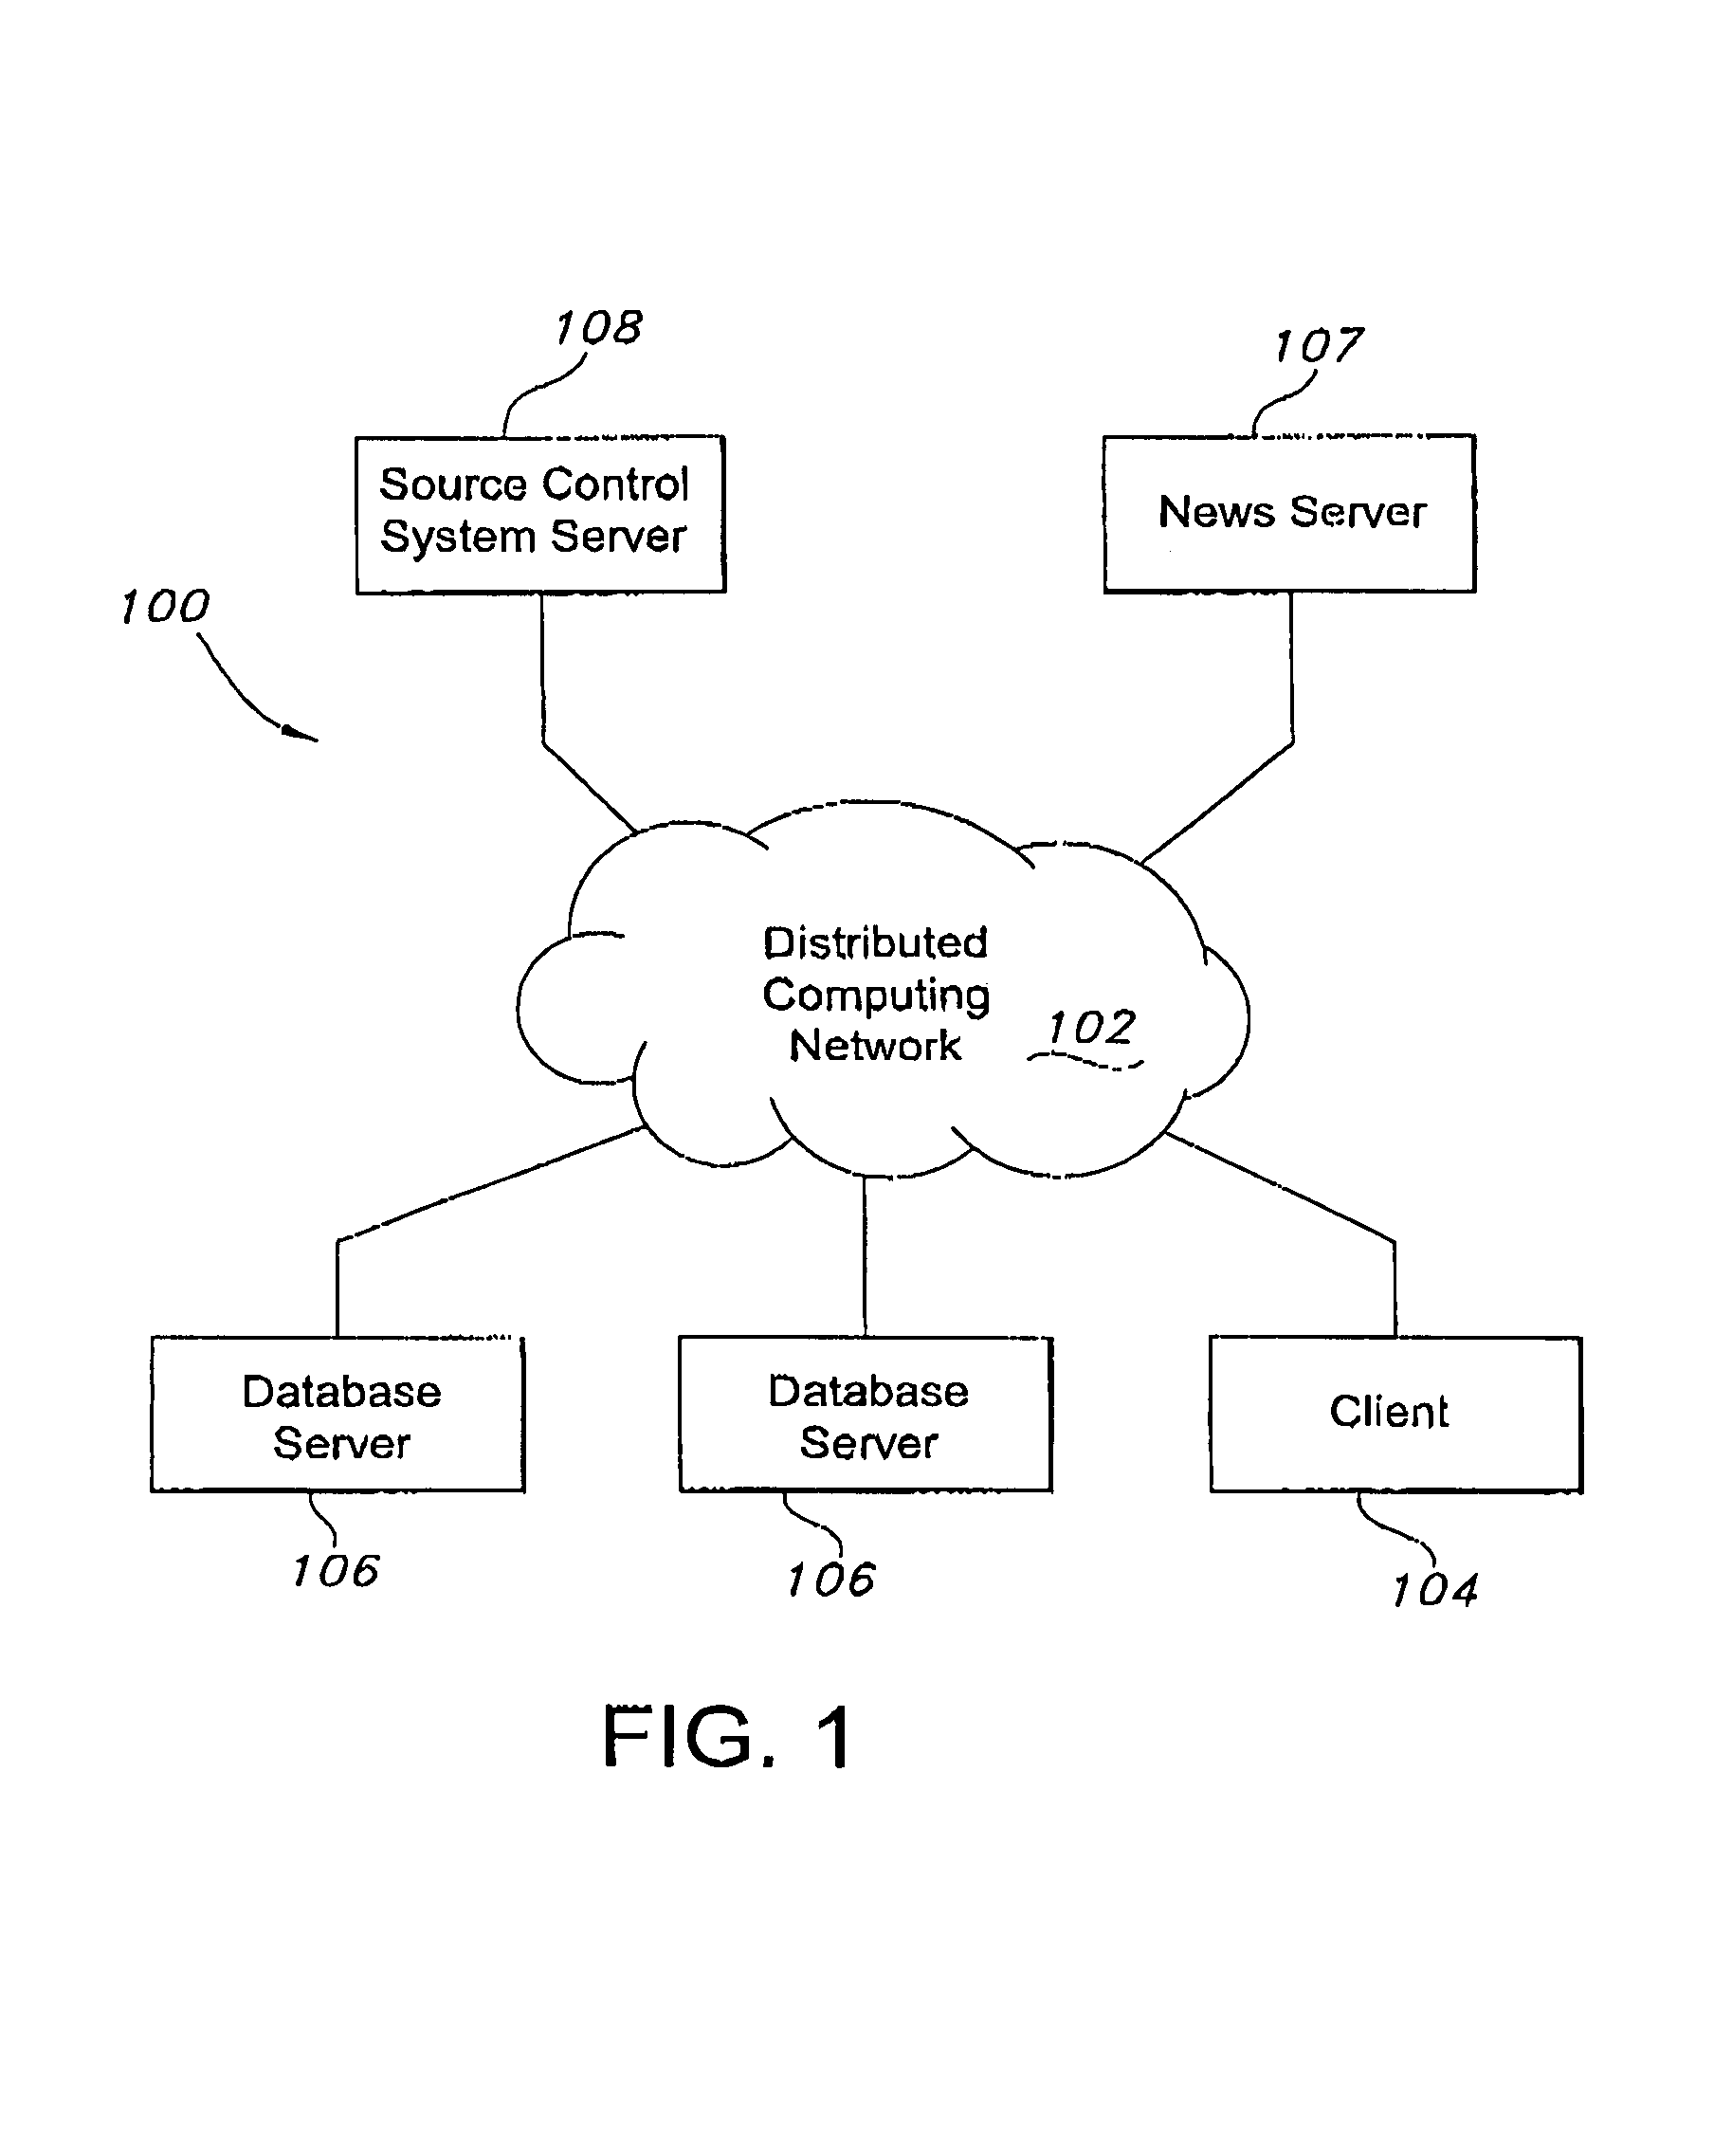 System and method for controlling the release of updates to a database configuration